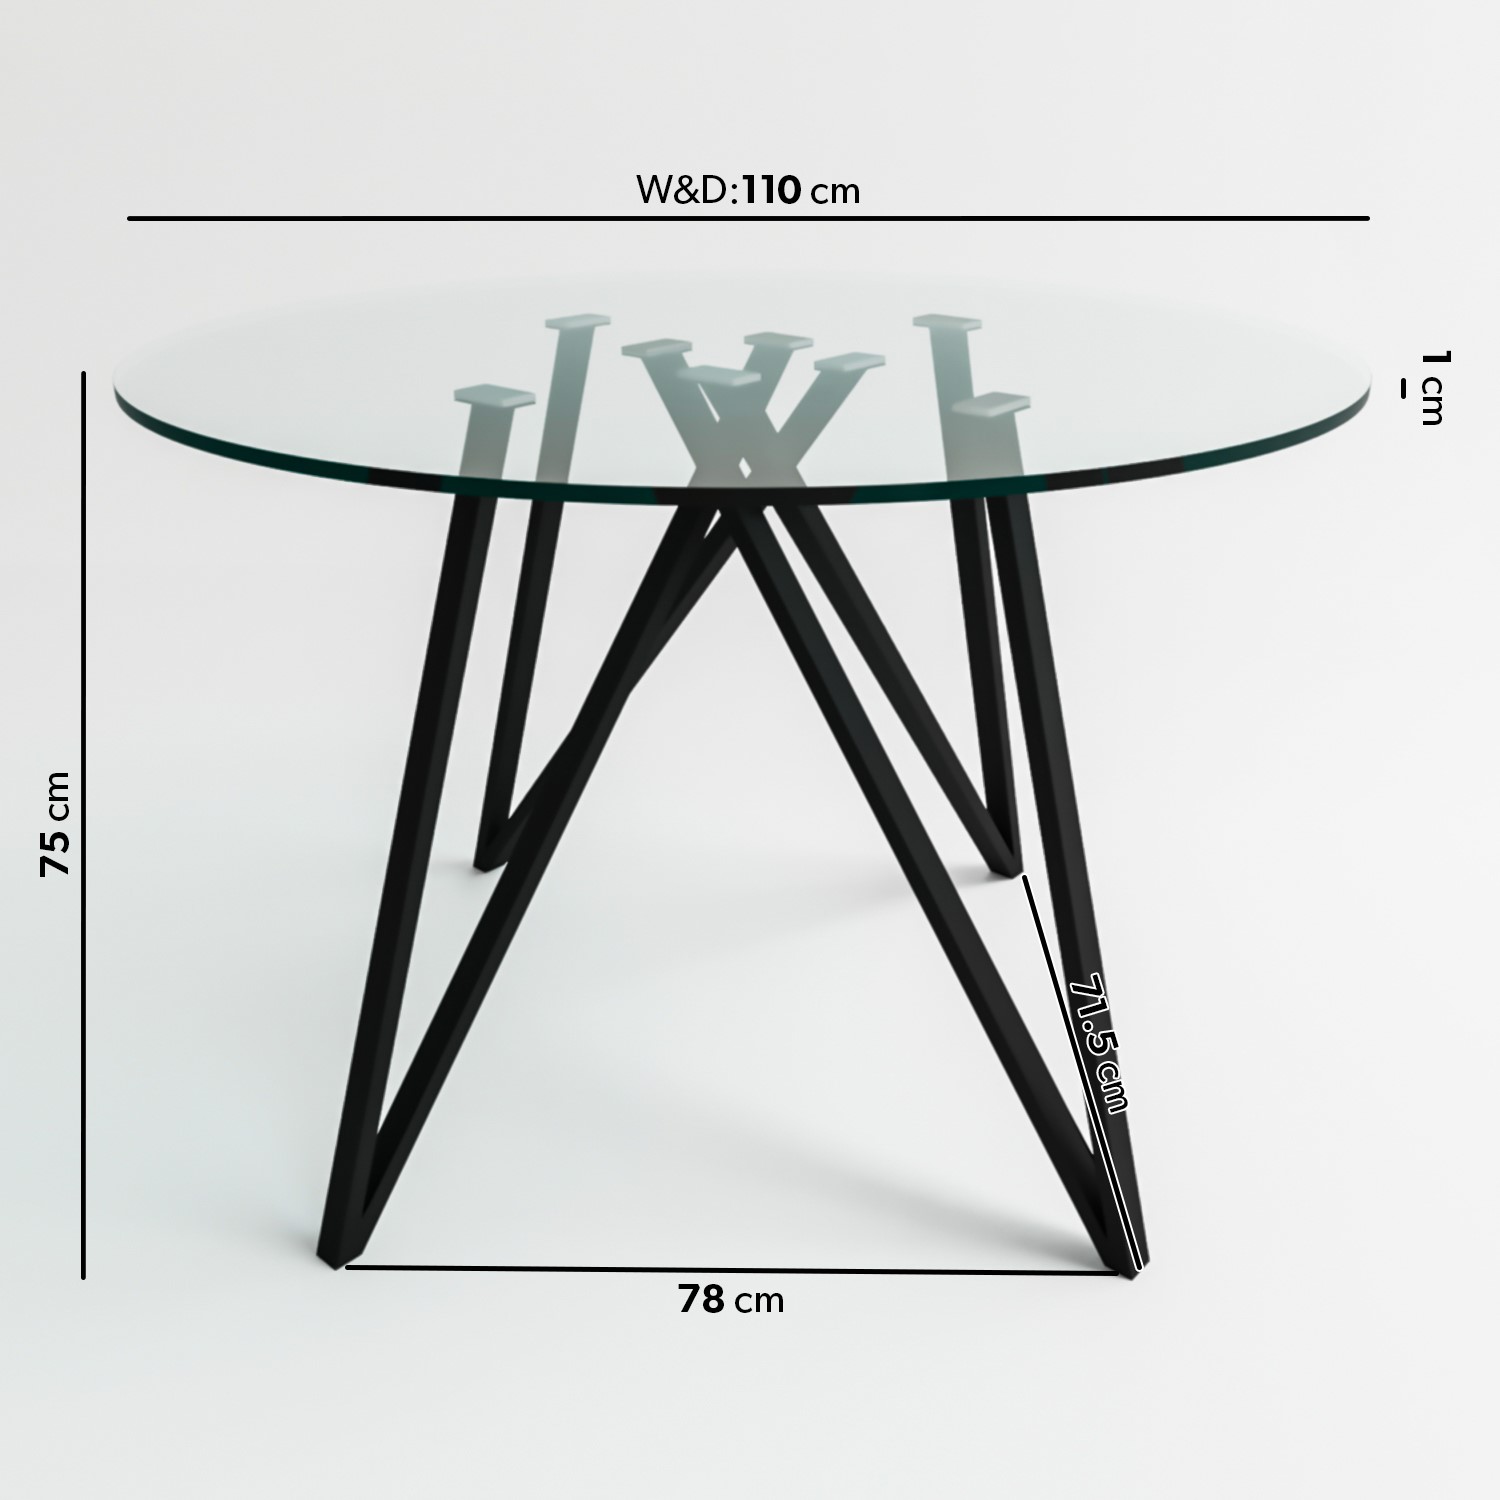 Read more about Round glass dining table with black legs seats 4 dax